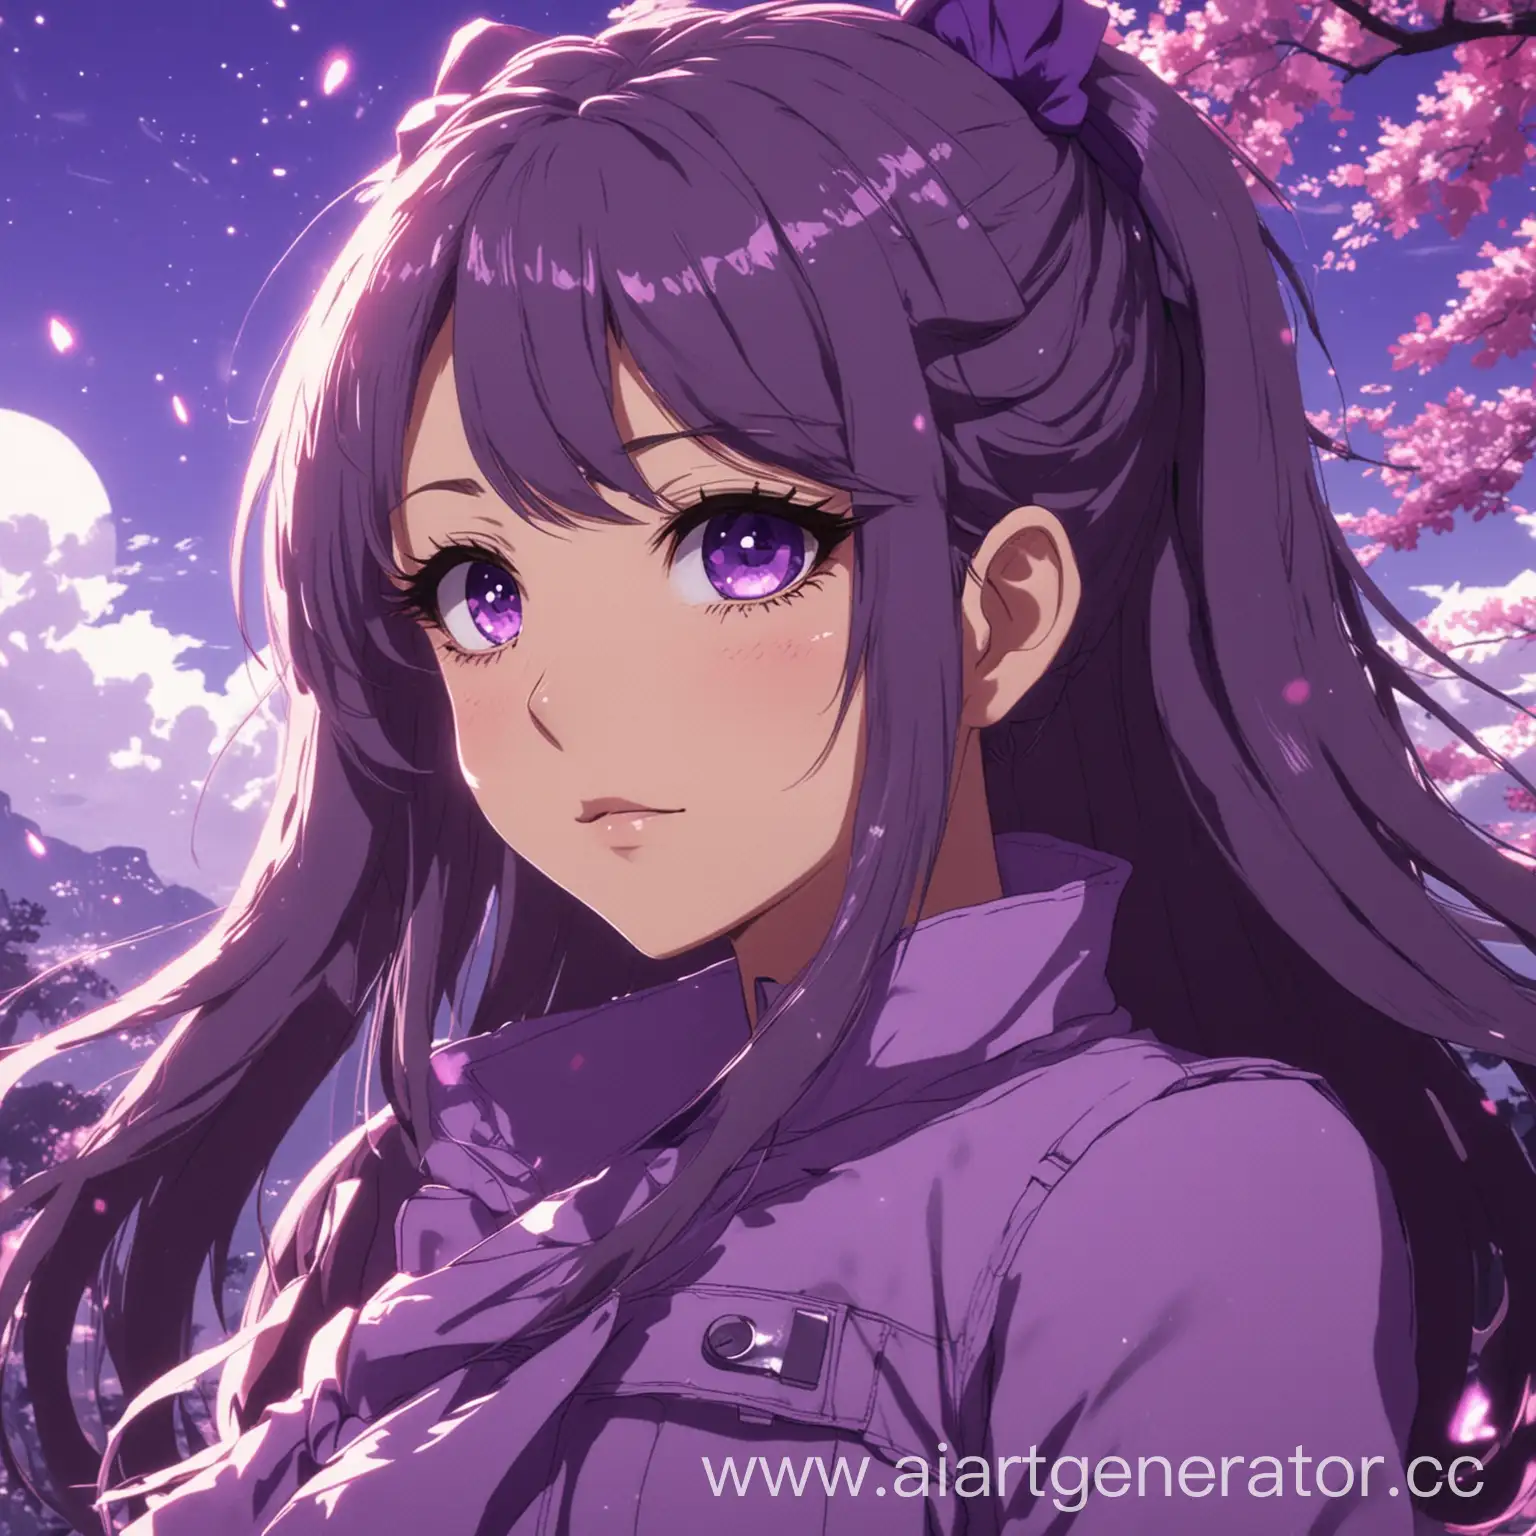 Preview for a song in anime style all purple